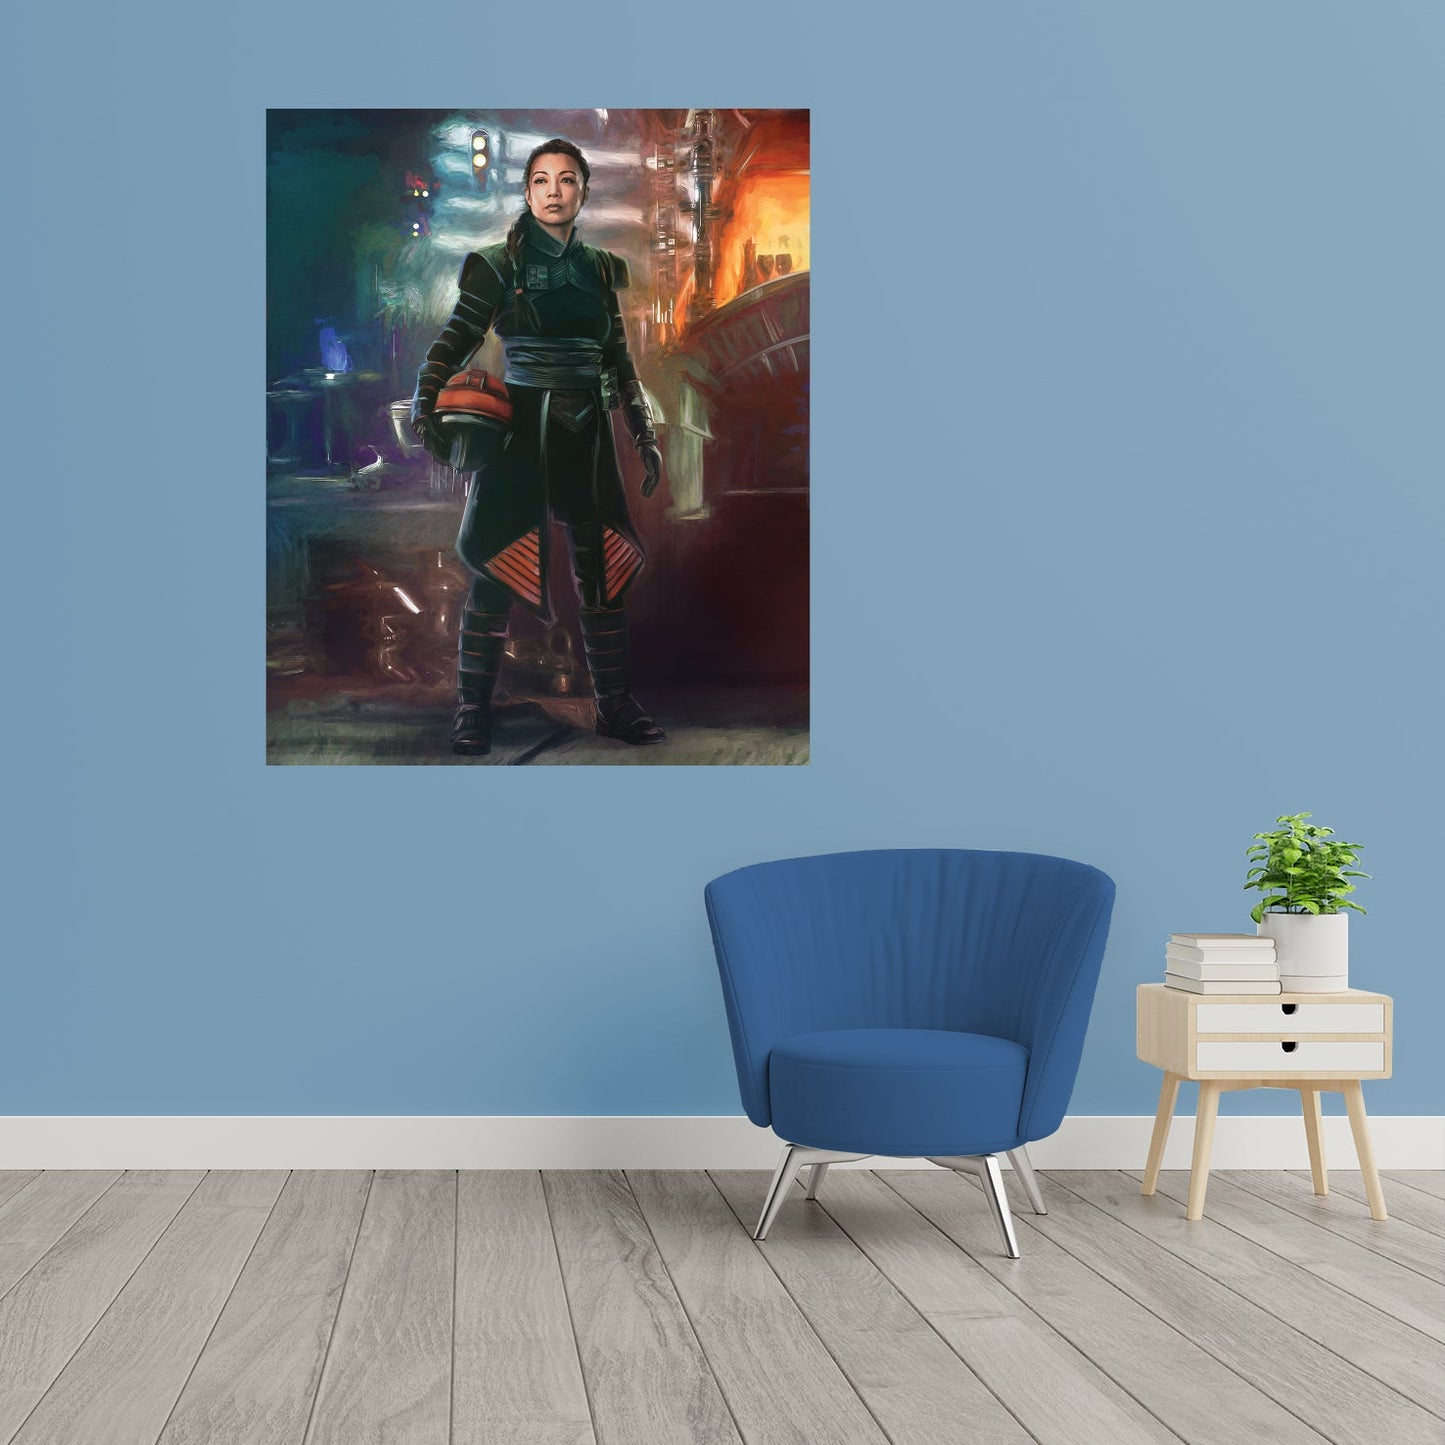 Book of Boba Fett: Fennec Shand Painted Poster - Officially Licensed Star Wars Removable Adhesive Decal